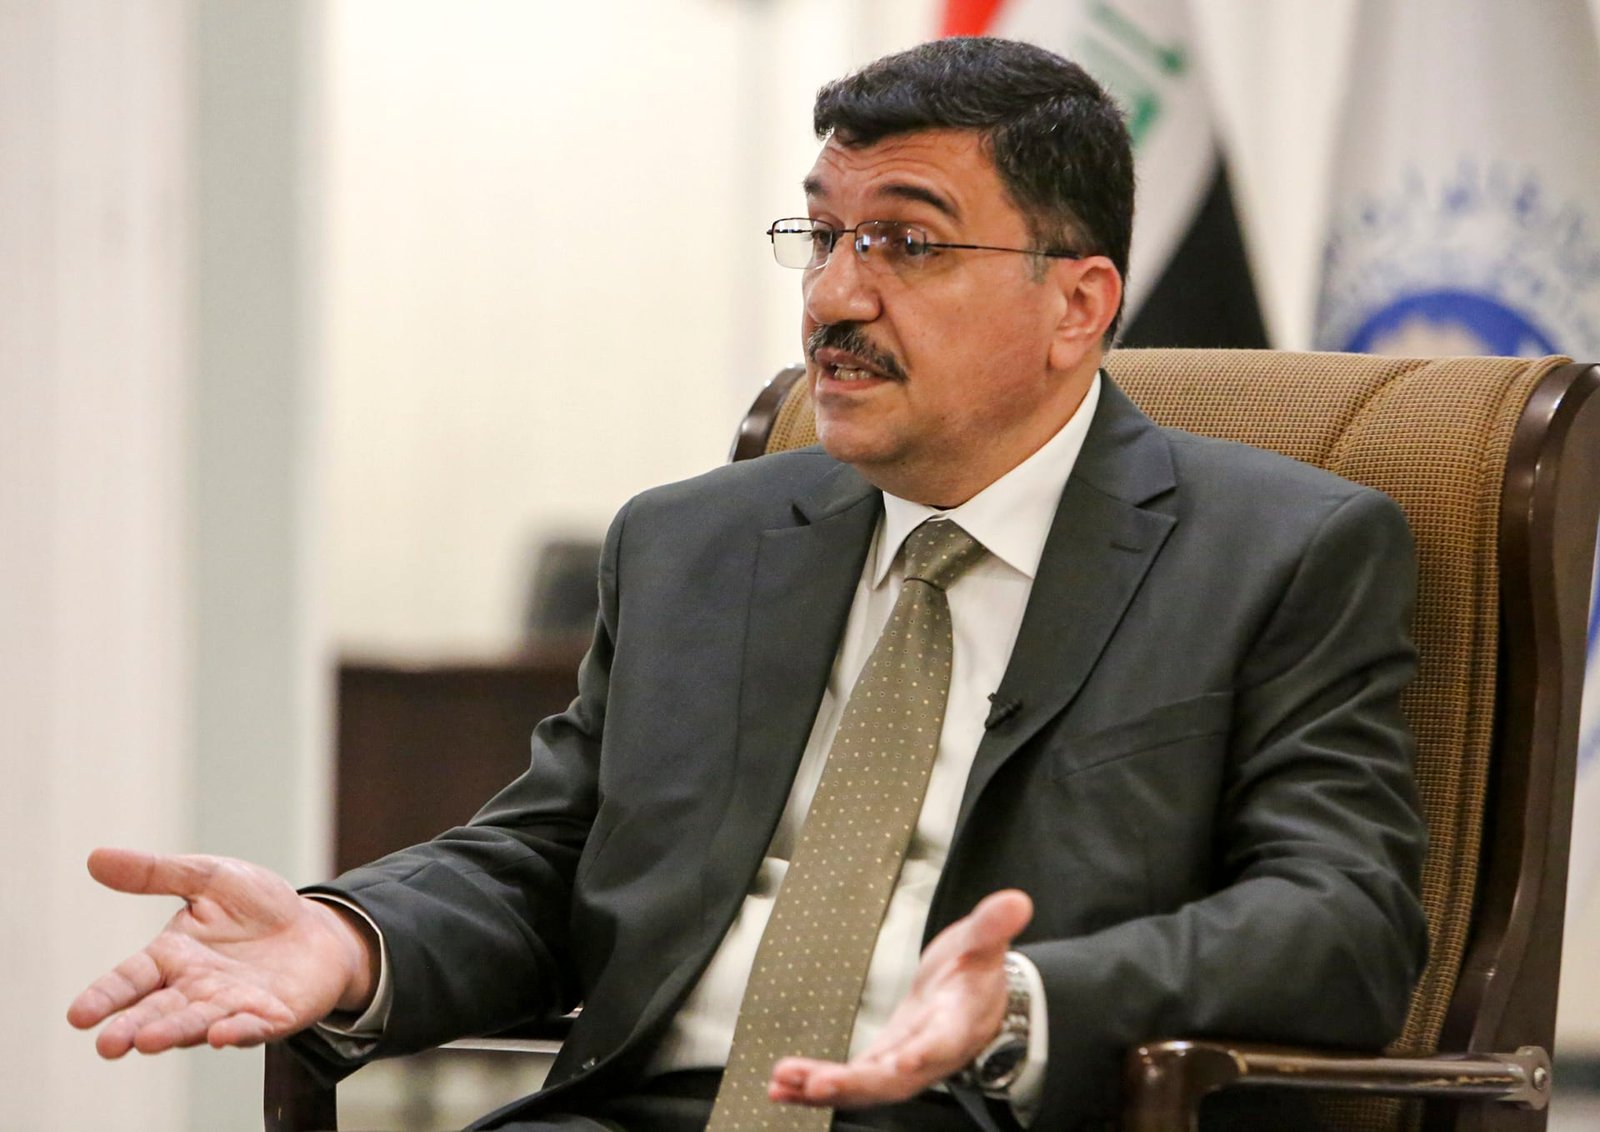 Minister of Water Resources Mahdi Al-Hamdani: Iran has diverted all the tributaries from the Shatt Al-Arab and built a dam without taking into account the interests of Iraq